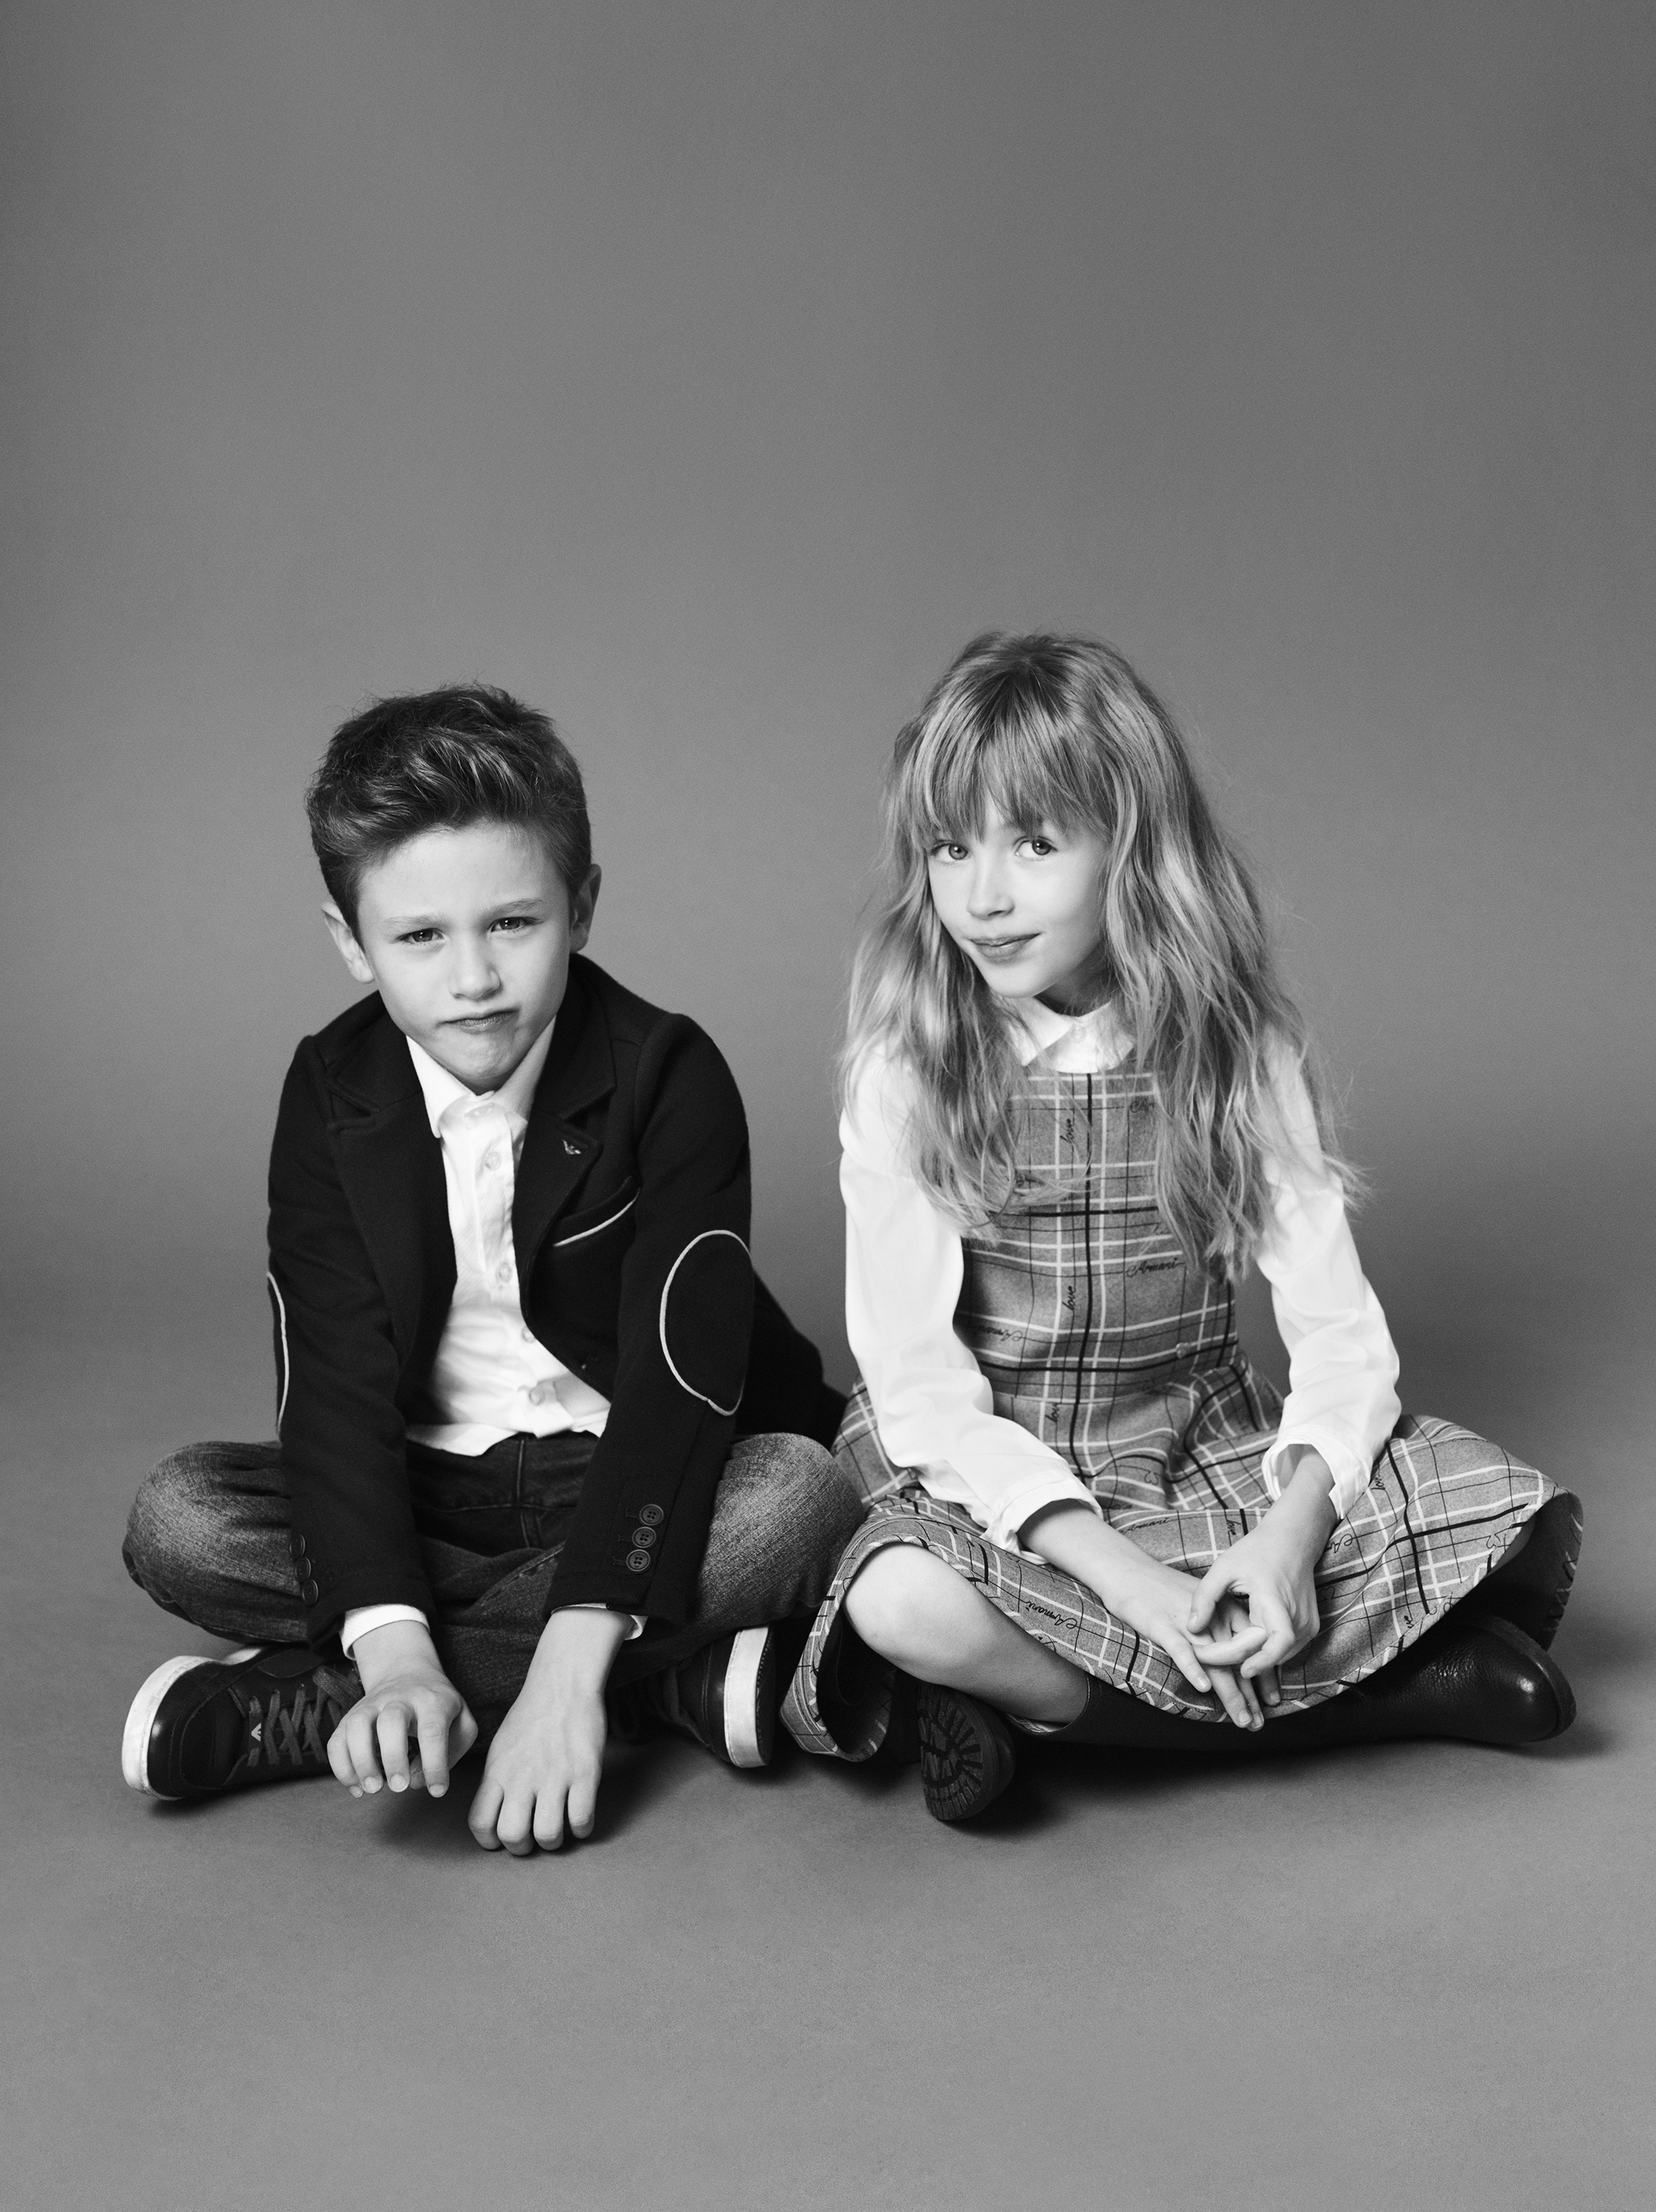 Artists inspire the new Armani Junior AW16 collection - A&E Magazine